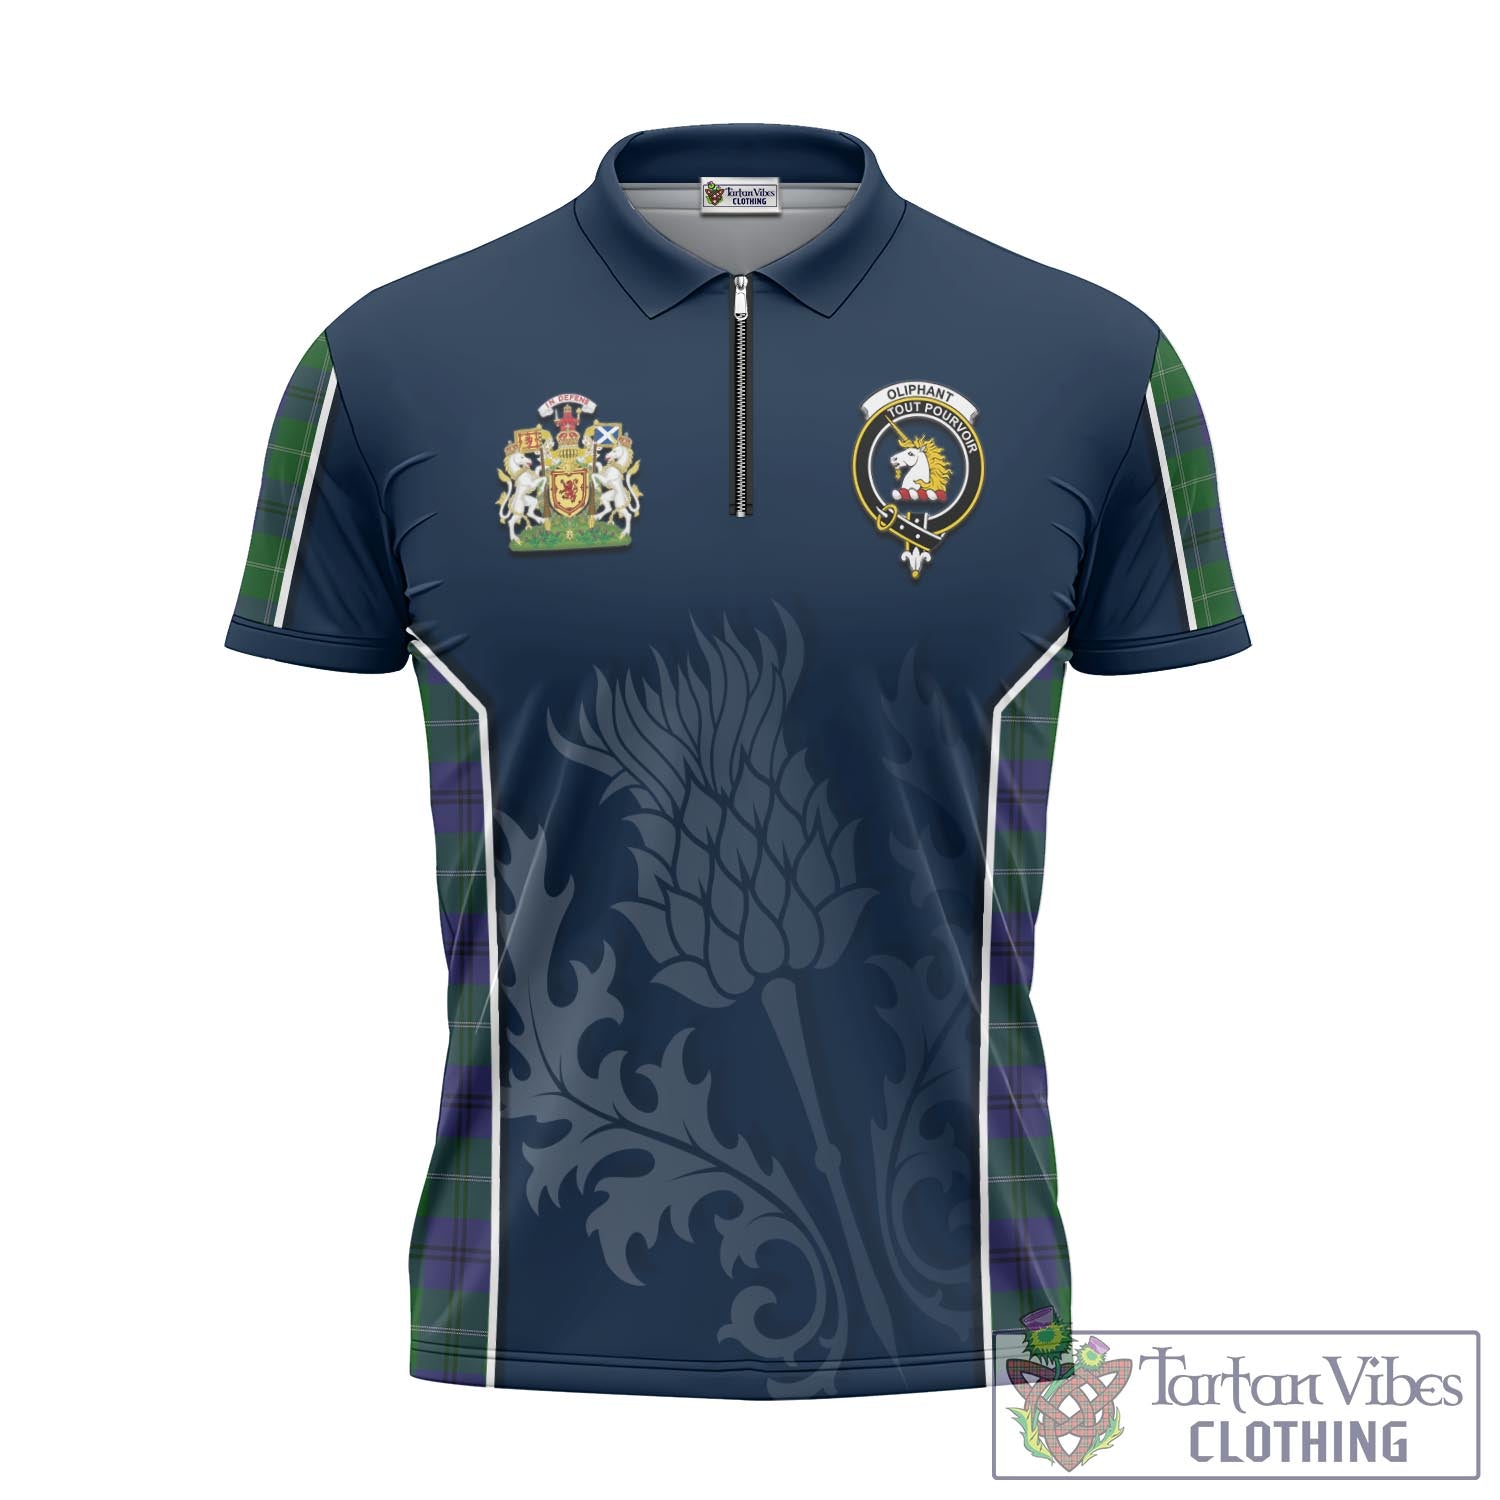 Tartan Vibes Clothing Oliphant Tartan Zipper Polo Shirt with Family Crest and Scottish Thistle Vibes Sport Style